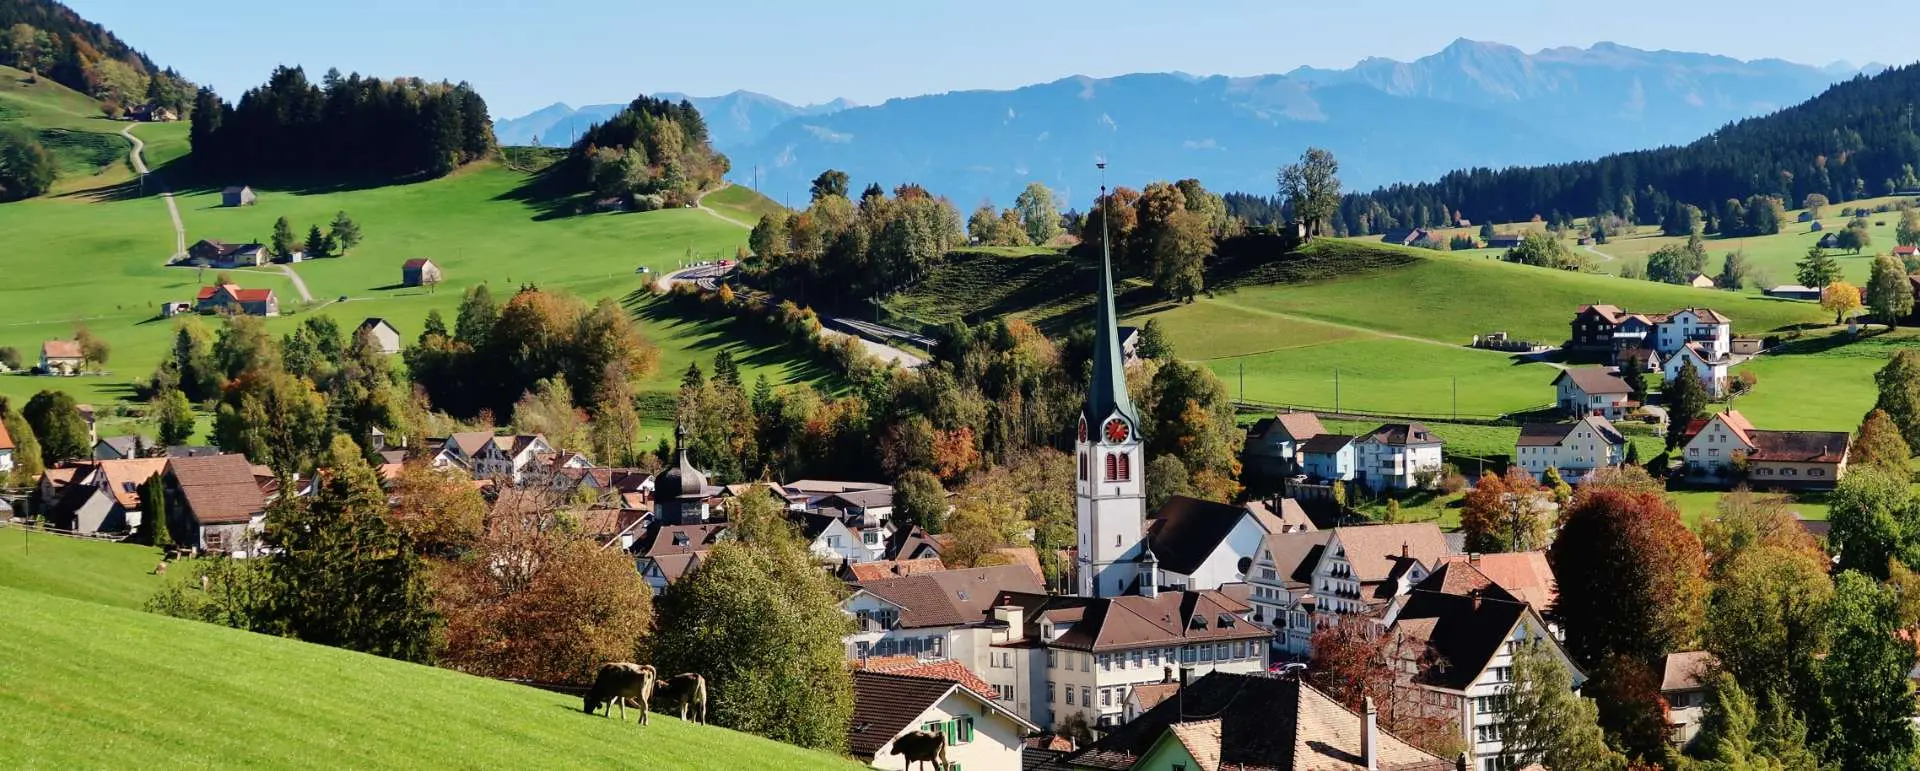 Appenzell - the destination for group hotel for cyclists